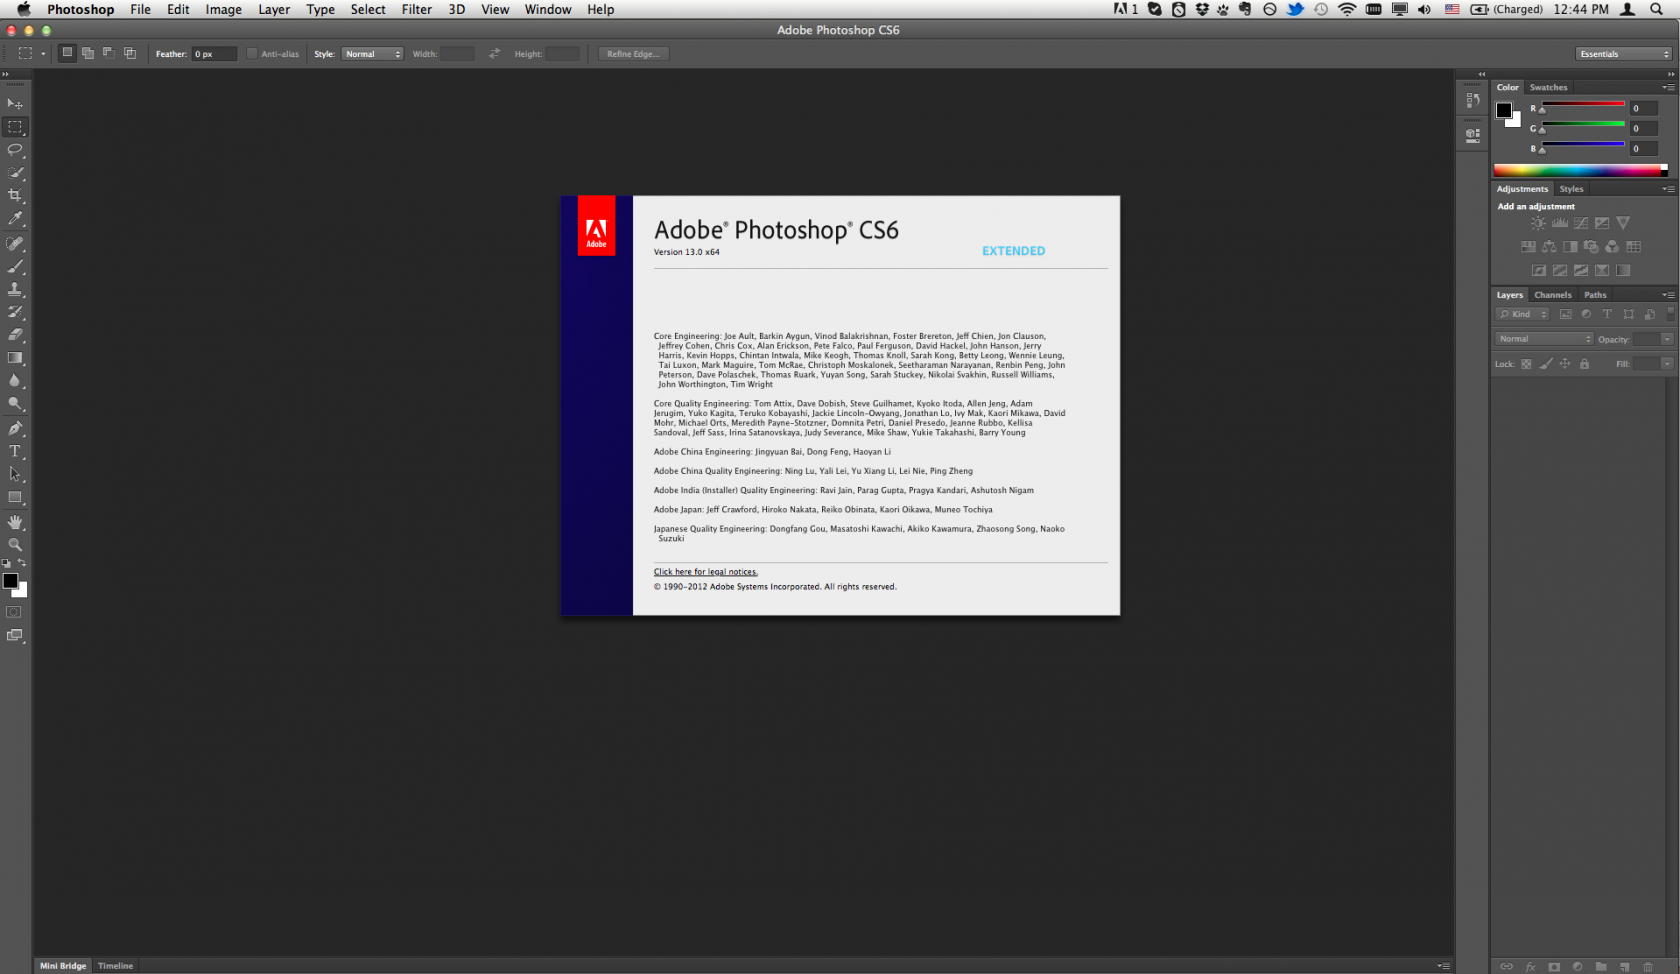 adobe photoshop cs6 extended crack only